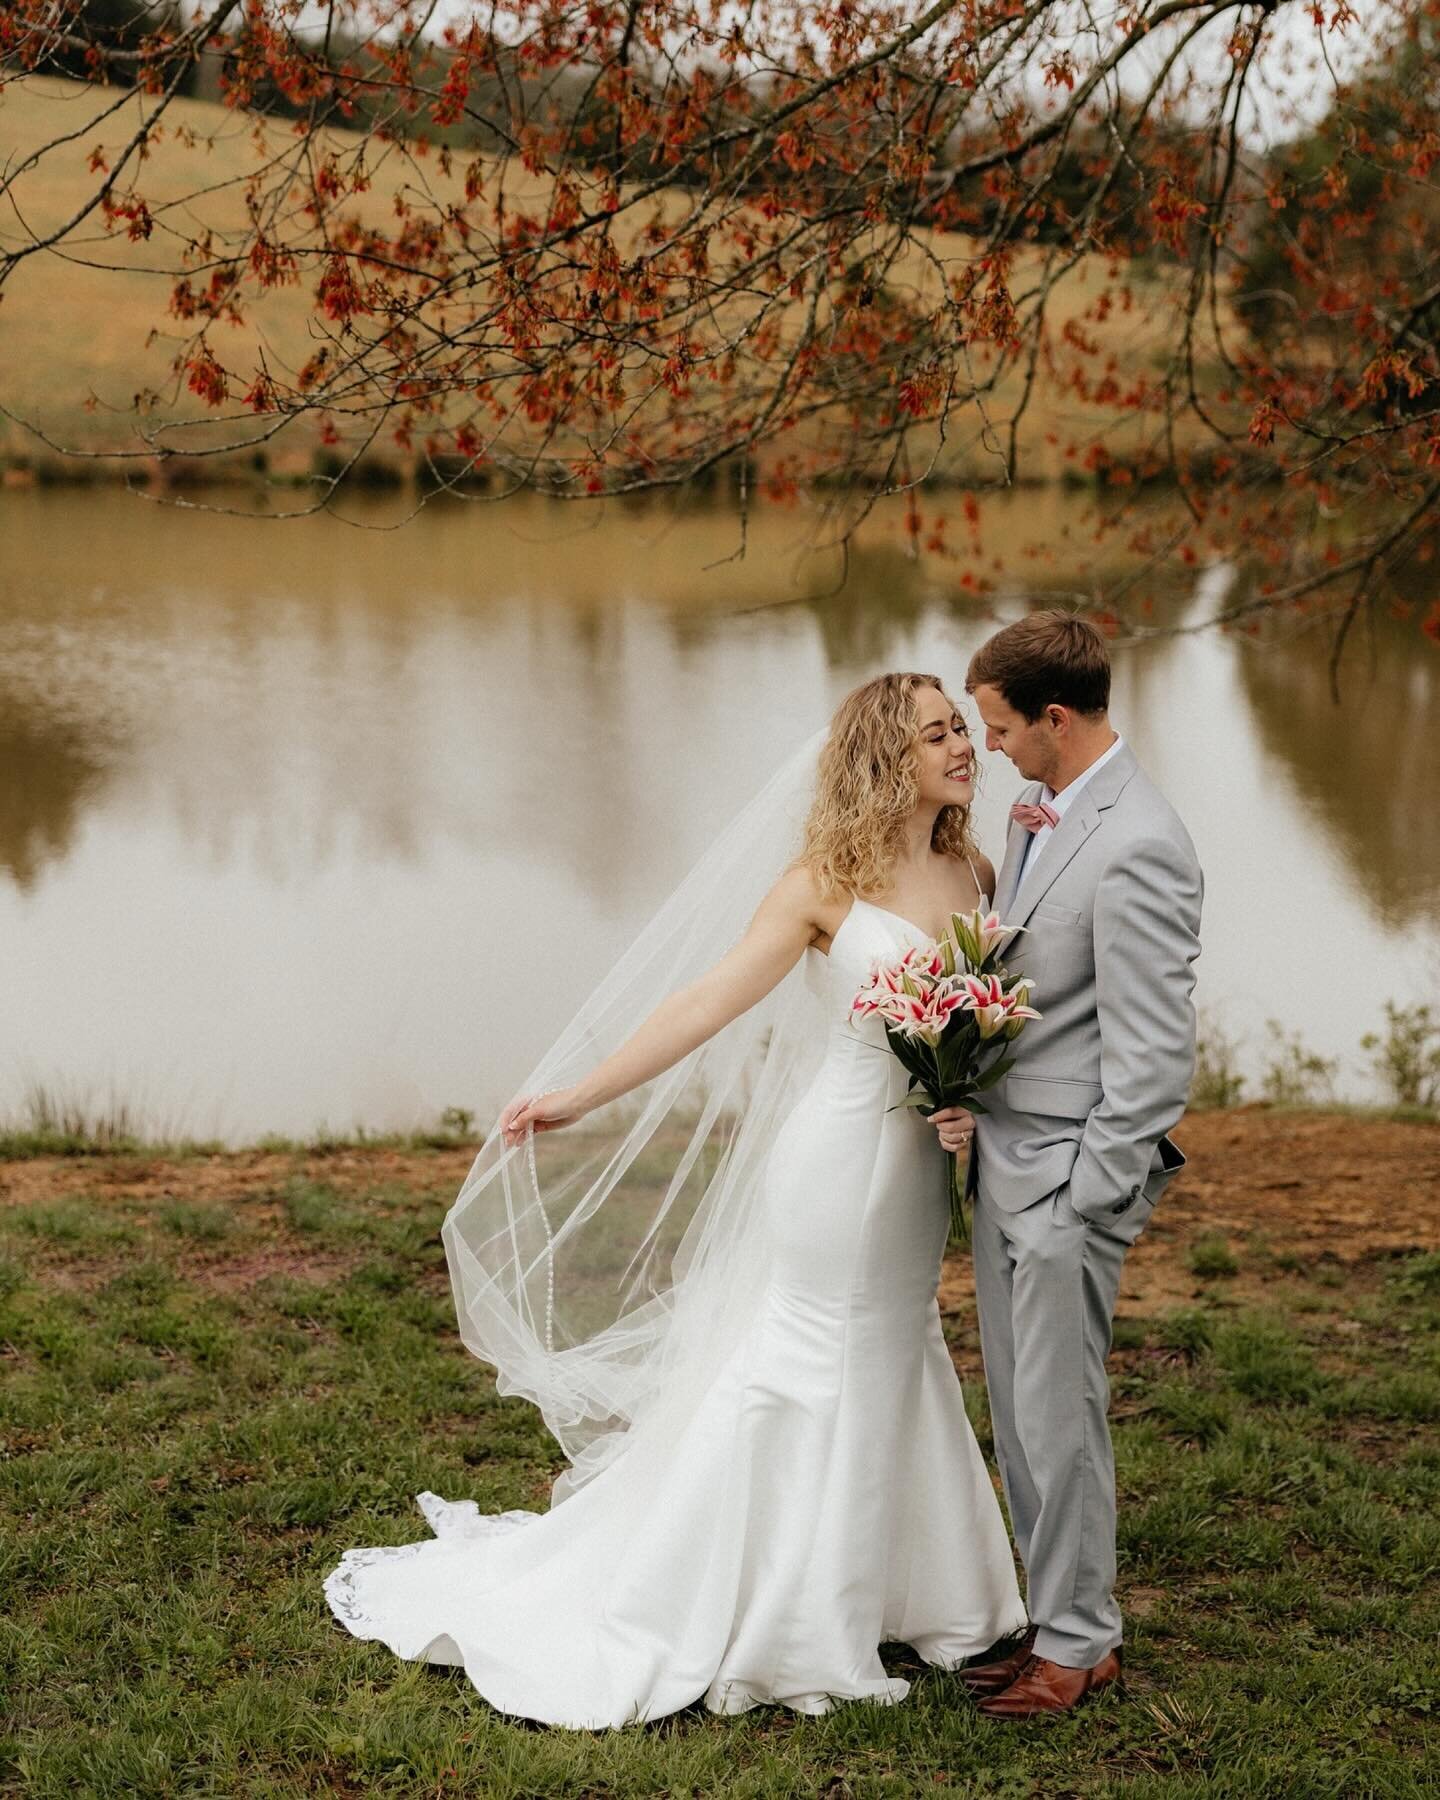 It was so fun exploring this new Cullman County wedding venue with Chloe and Zeke! If you&rsquo;re looking for a wedding venue with so so many gorgeous outdoor ceremony location options, I highly recommend a tour!! 

@sullivancreekranchal